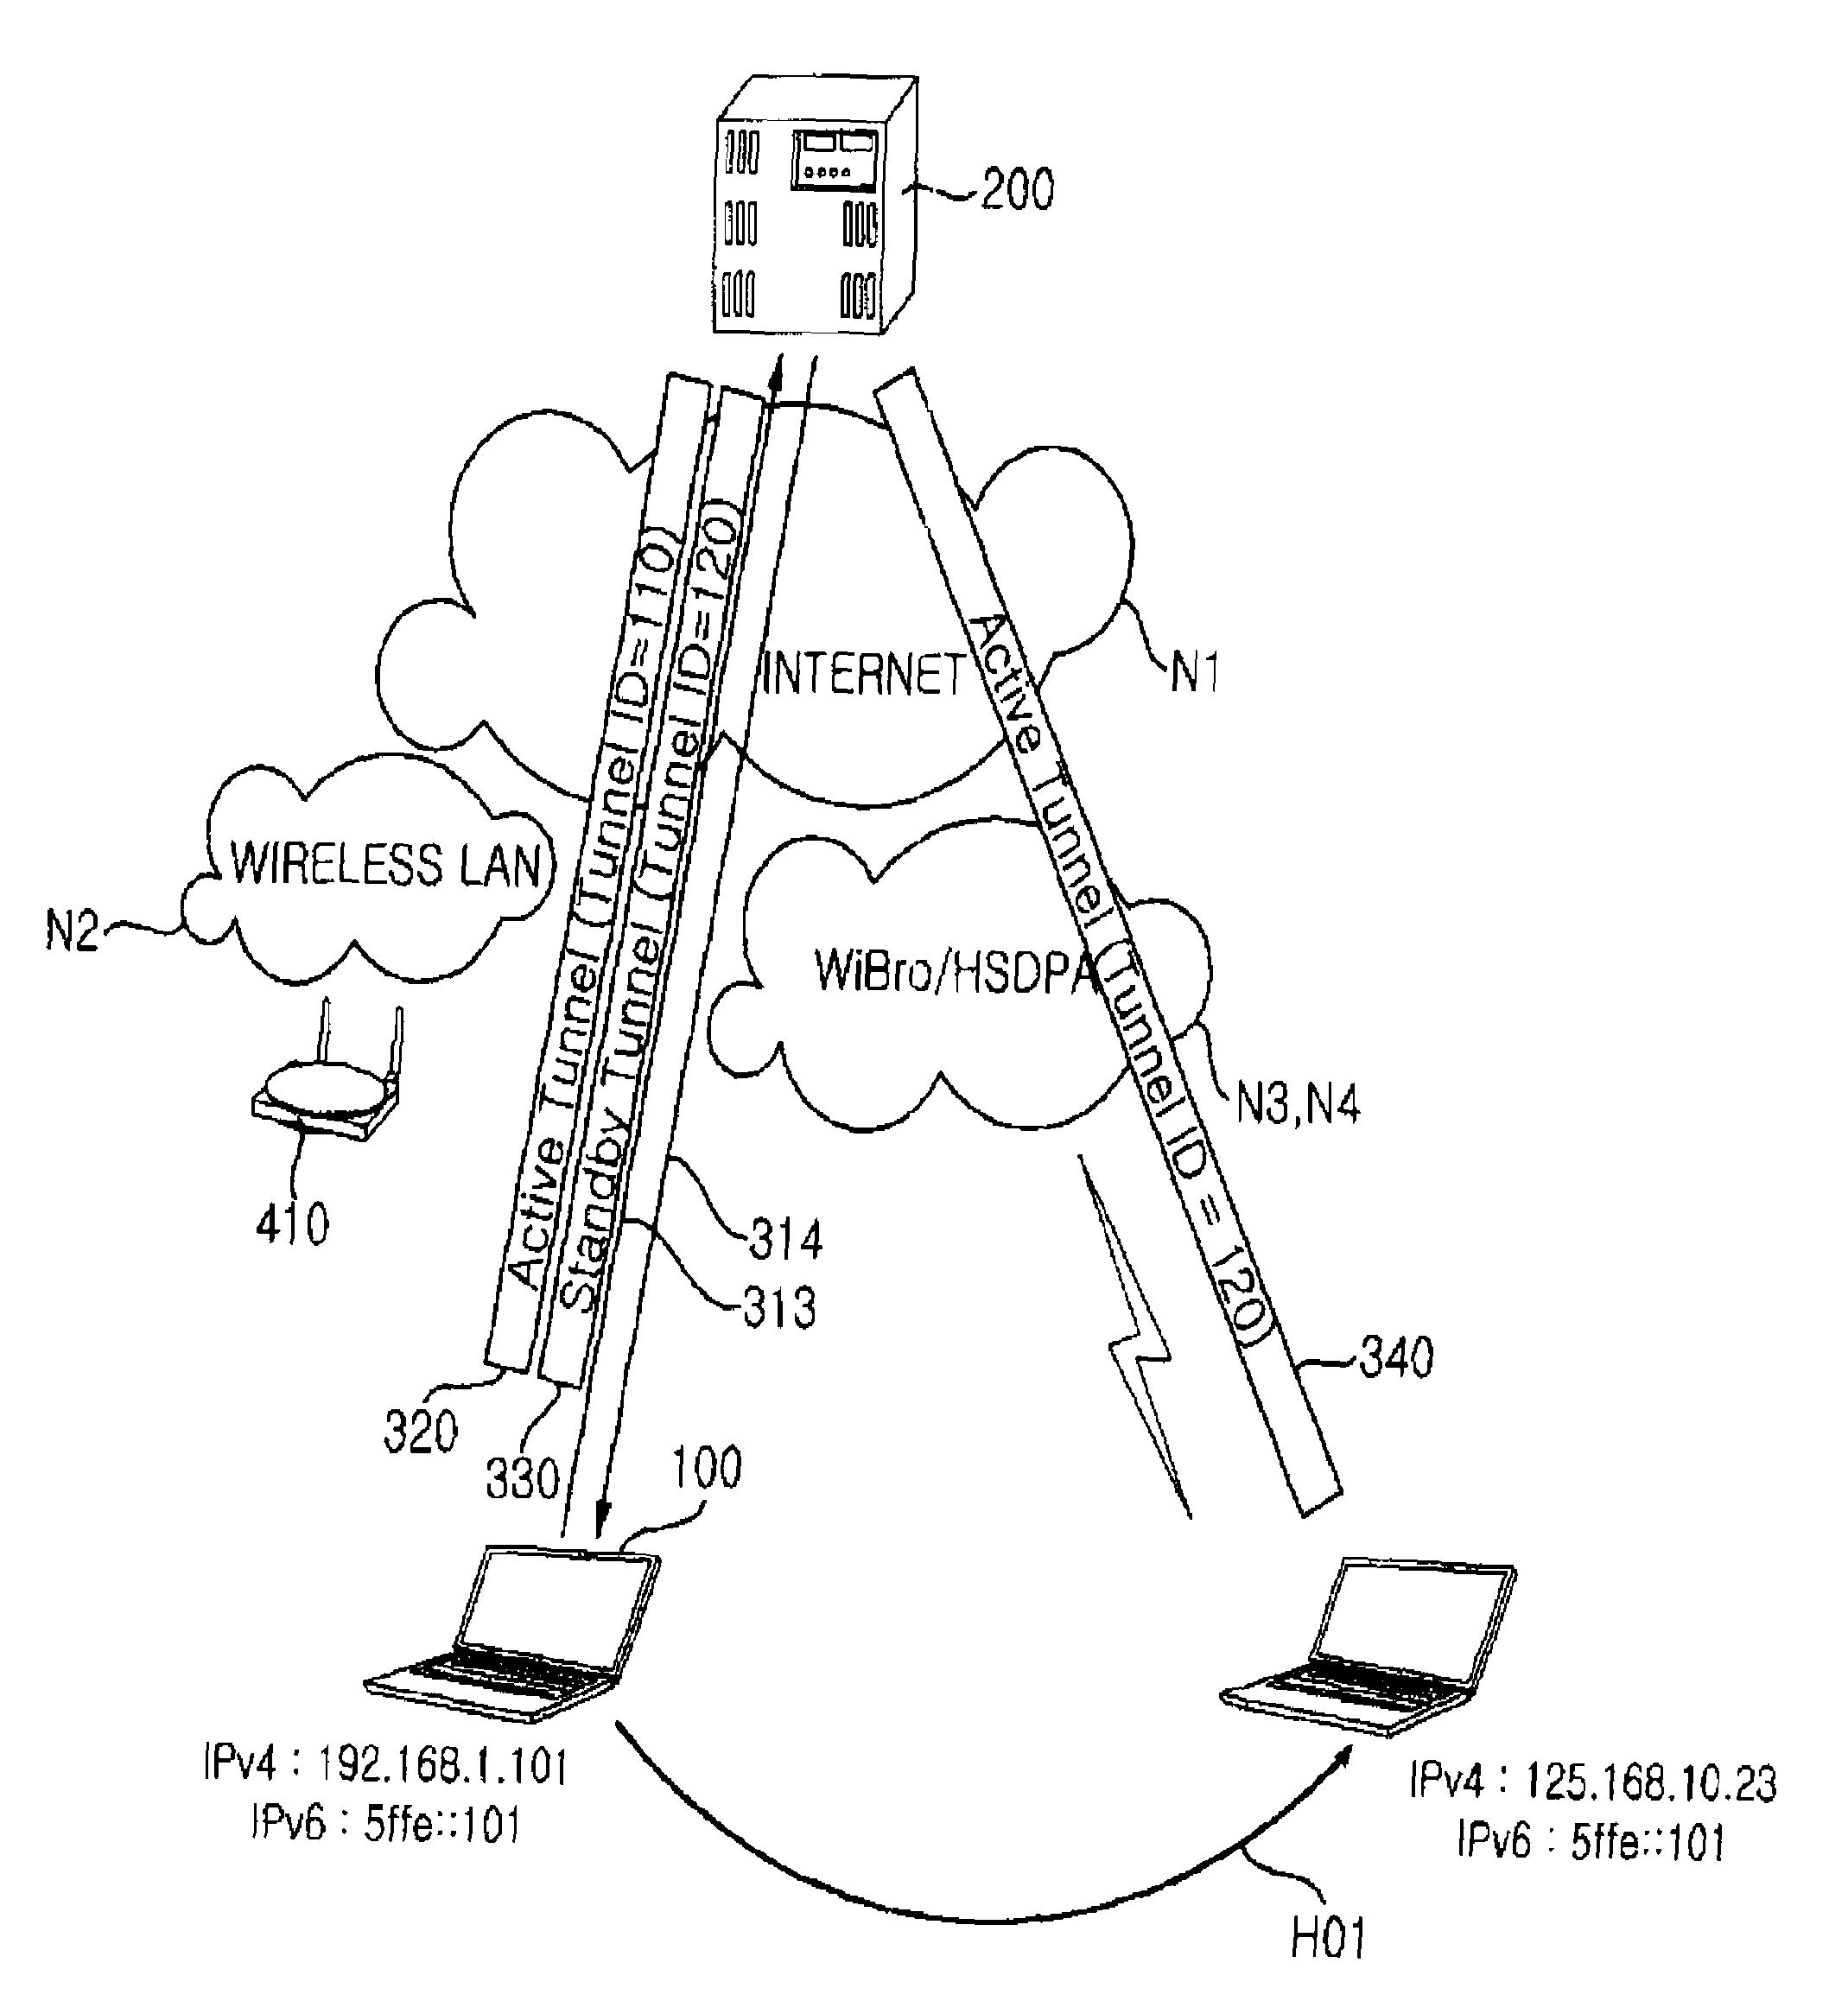 Apparatus and method of controlling seamless handover between heterogeneous networks based on IPv6 over IPv4 tunneling mechanism